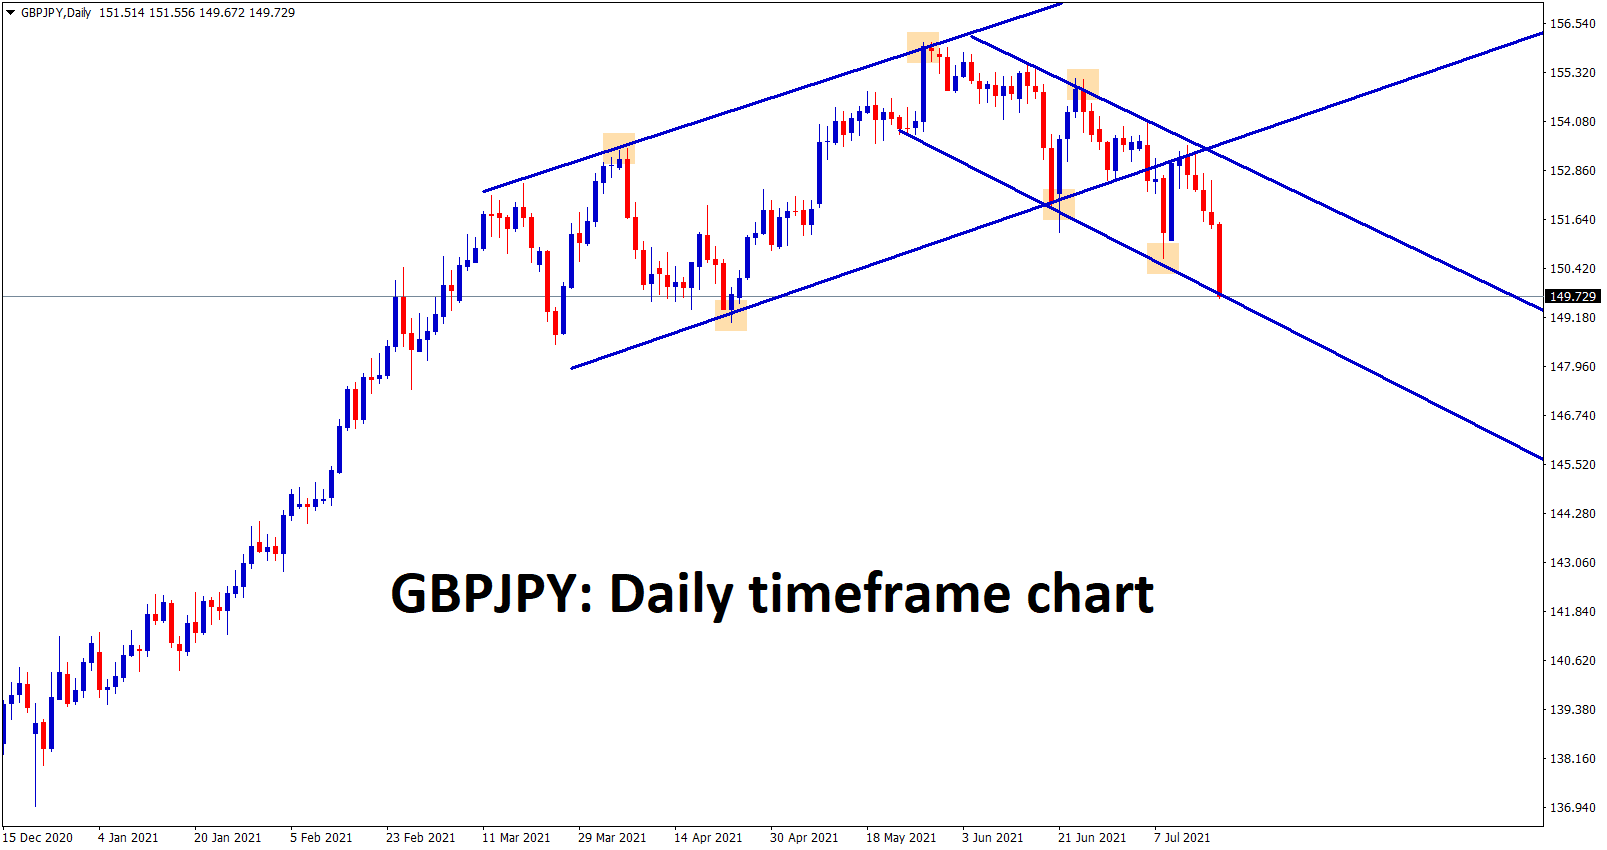 GBPJPY is moving in a Descending Channel